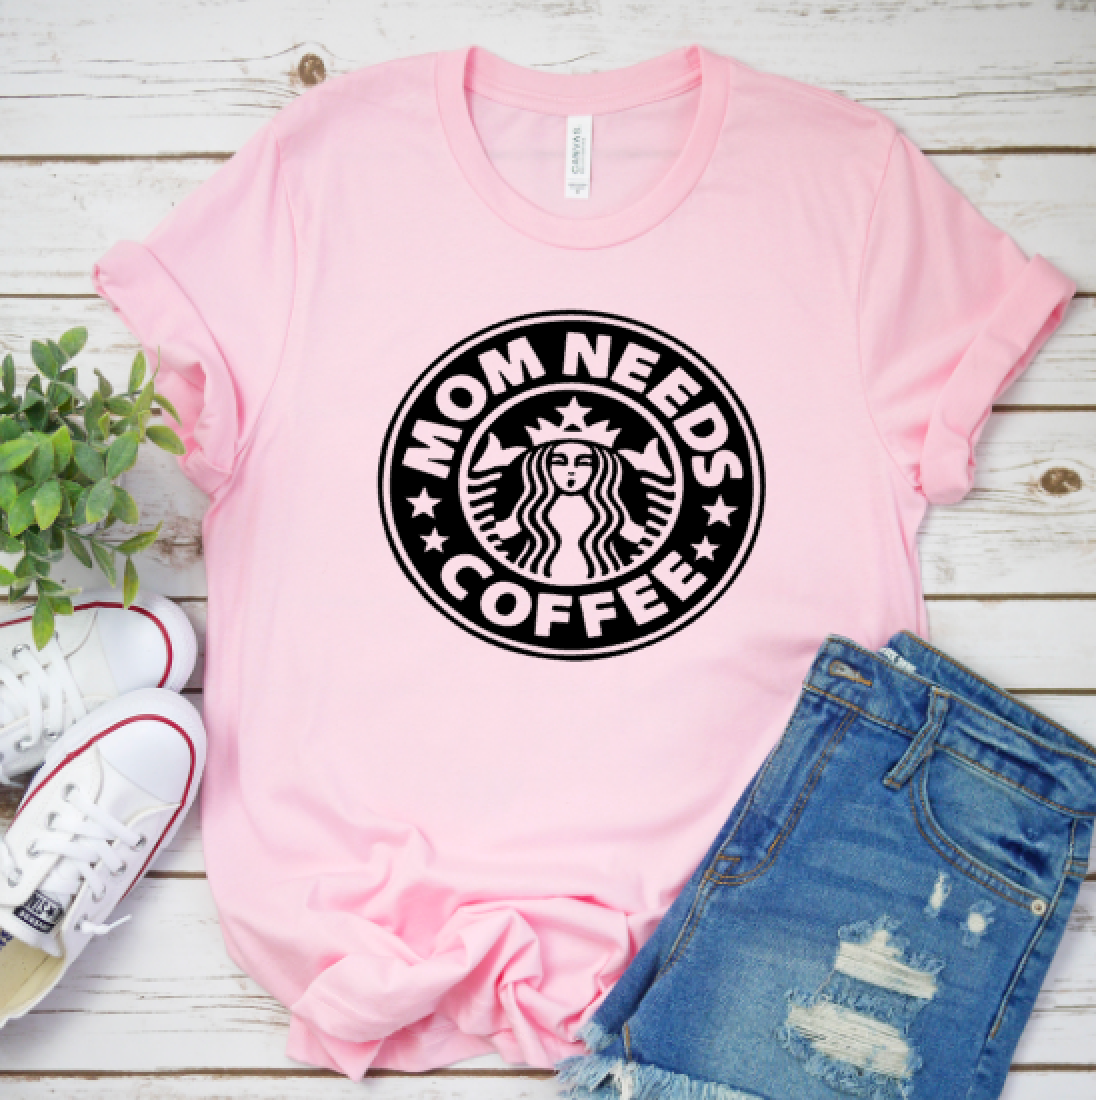 Mom Needs Coffee T-shirt on Soft, Hi-Quality Bella Canvas Tee - Pink  Ivy and Pearl Boutique S  